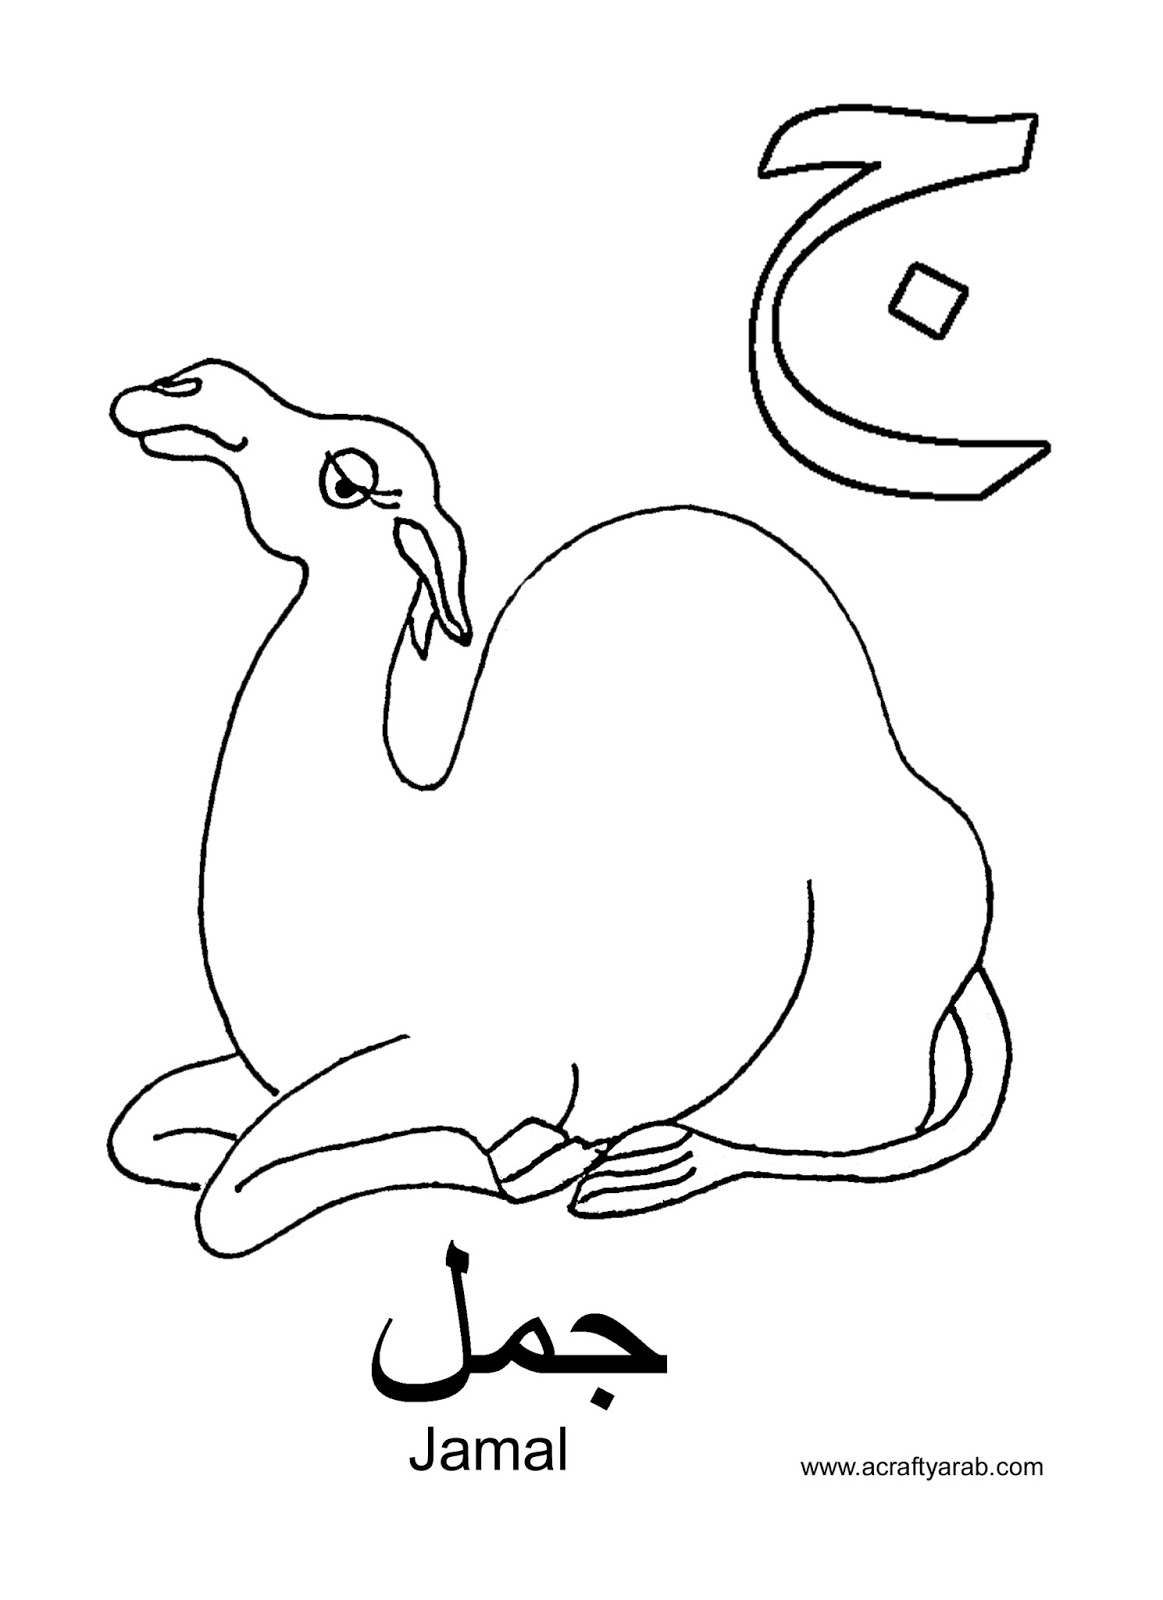 A Crafty Arab: Arabic Alphabet coloring pages...Jeem is for Jamal